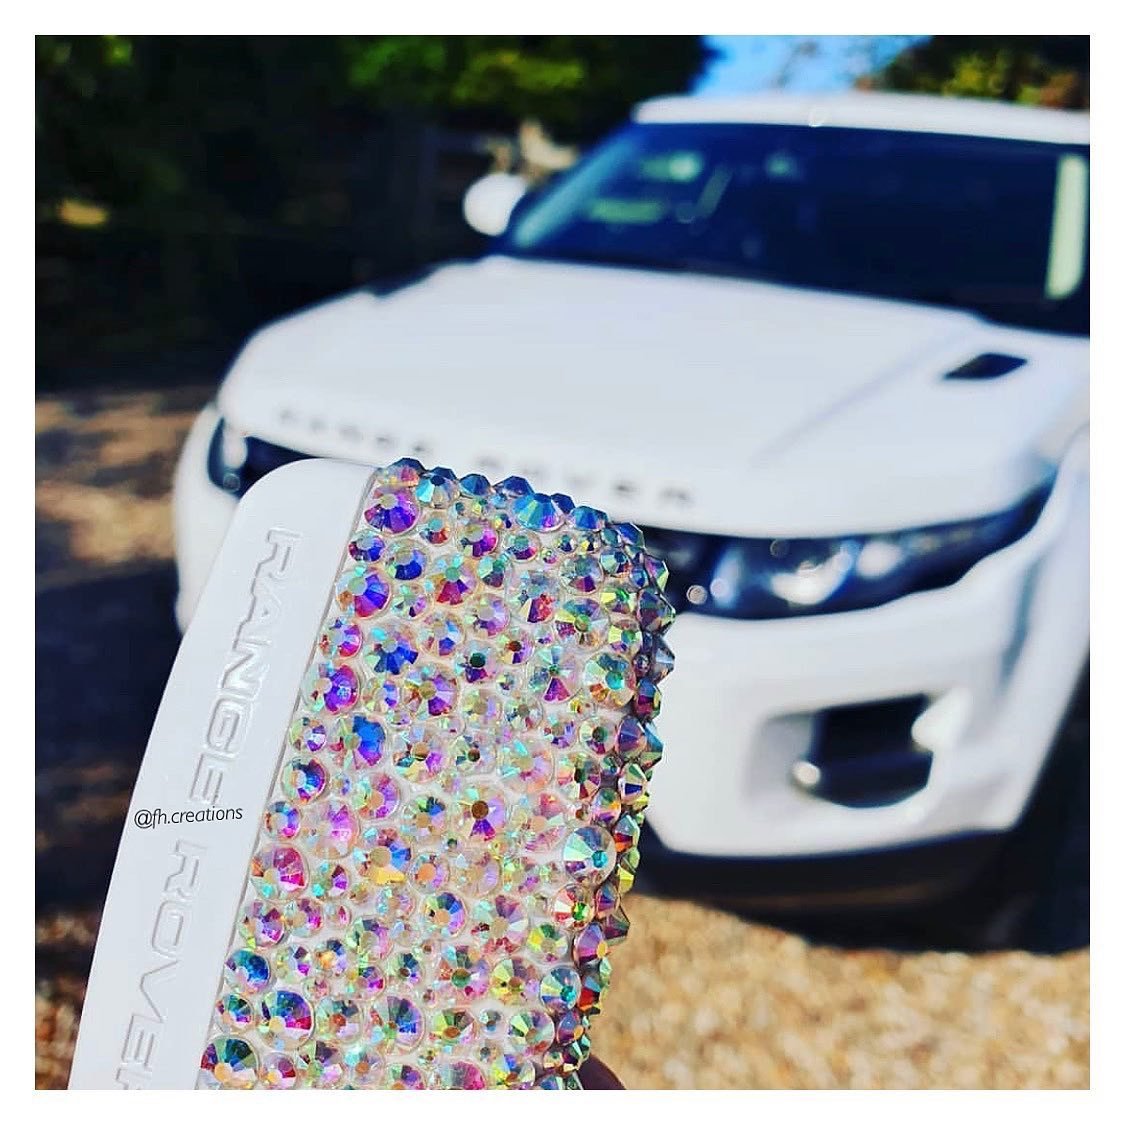 Range Rover Key Cover | FH Creations